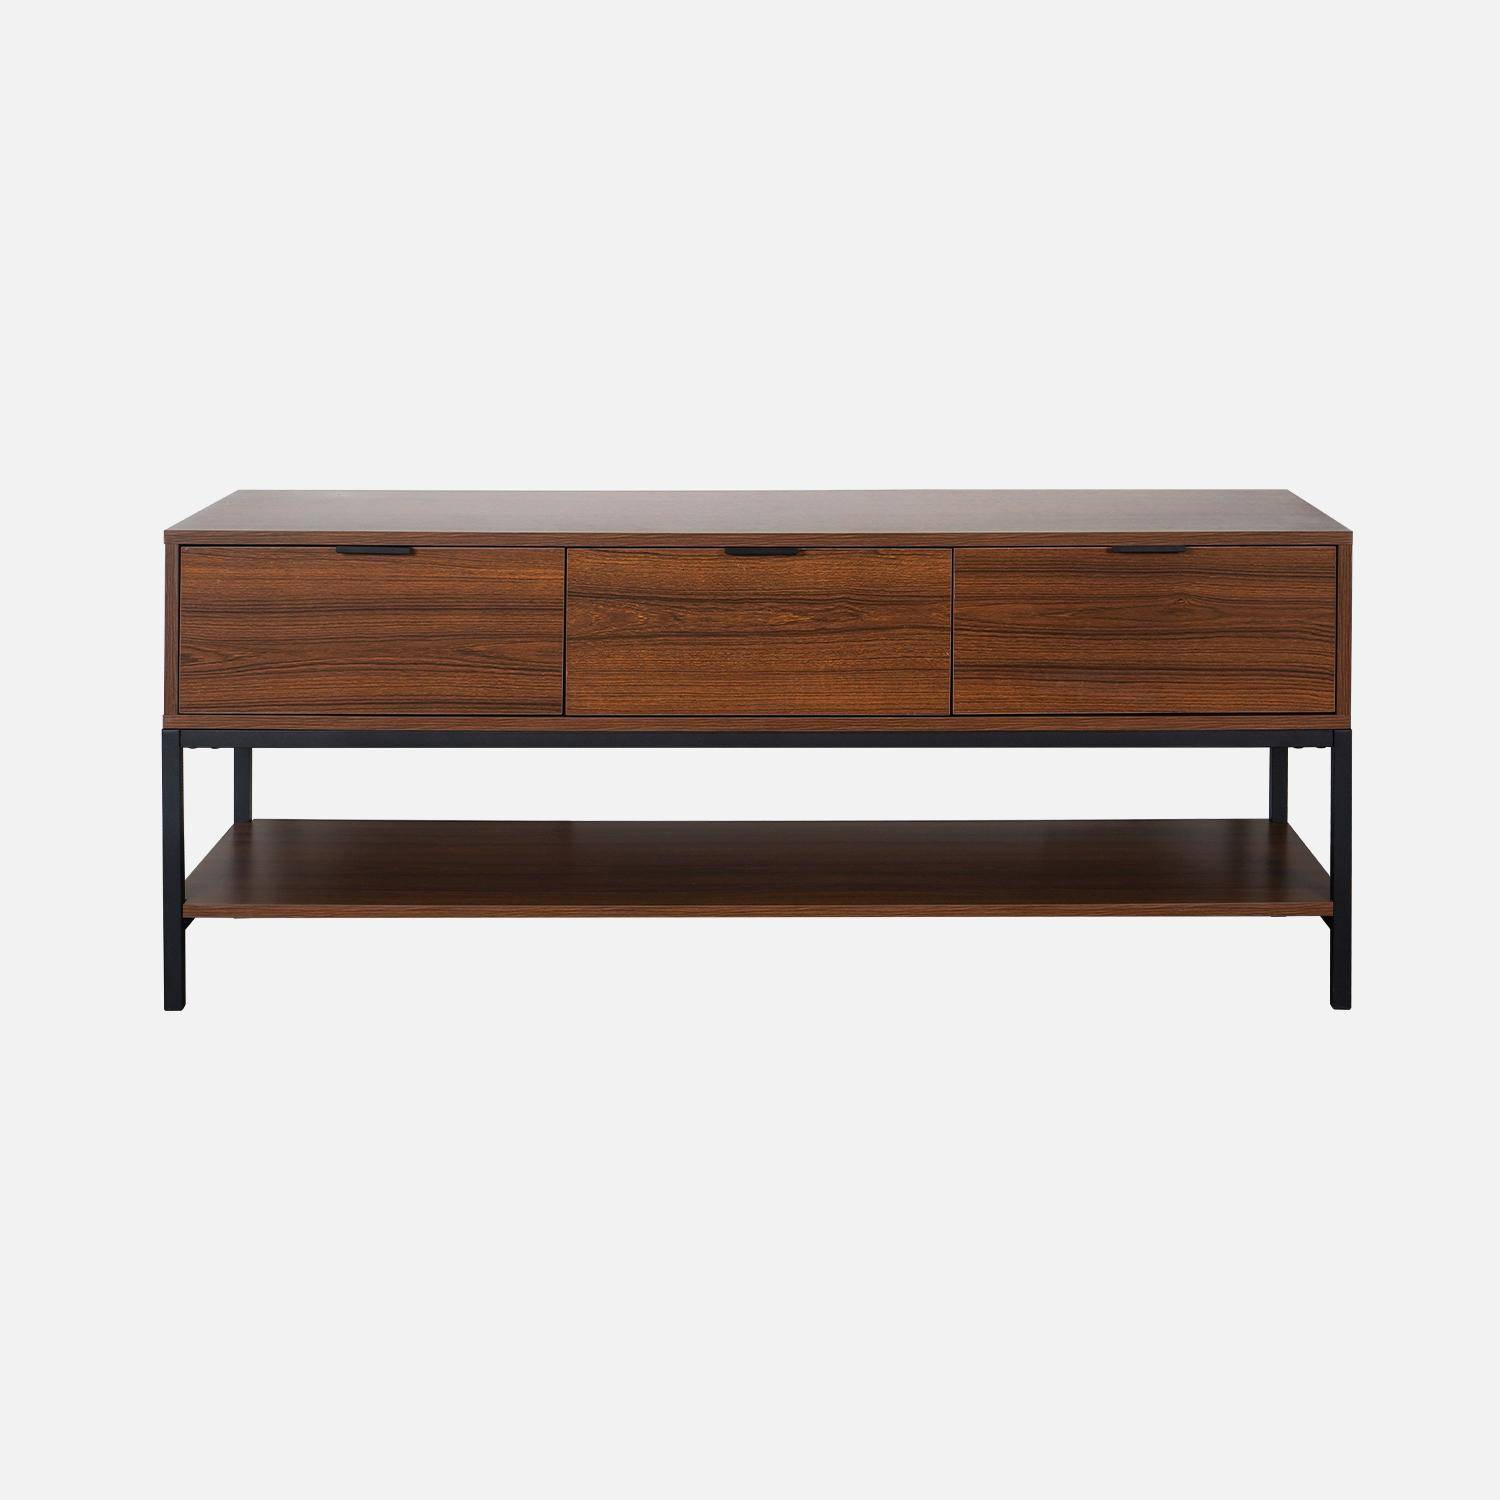 TV unit in walnut with black metal base and handles - 3 drawers and 1 lower shelf,sweeek,Photo4